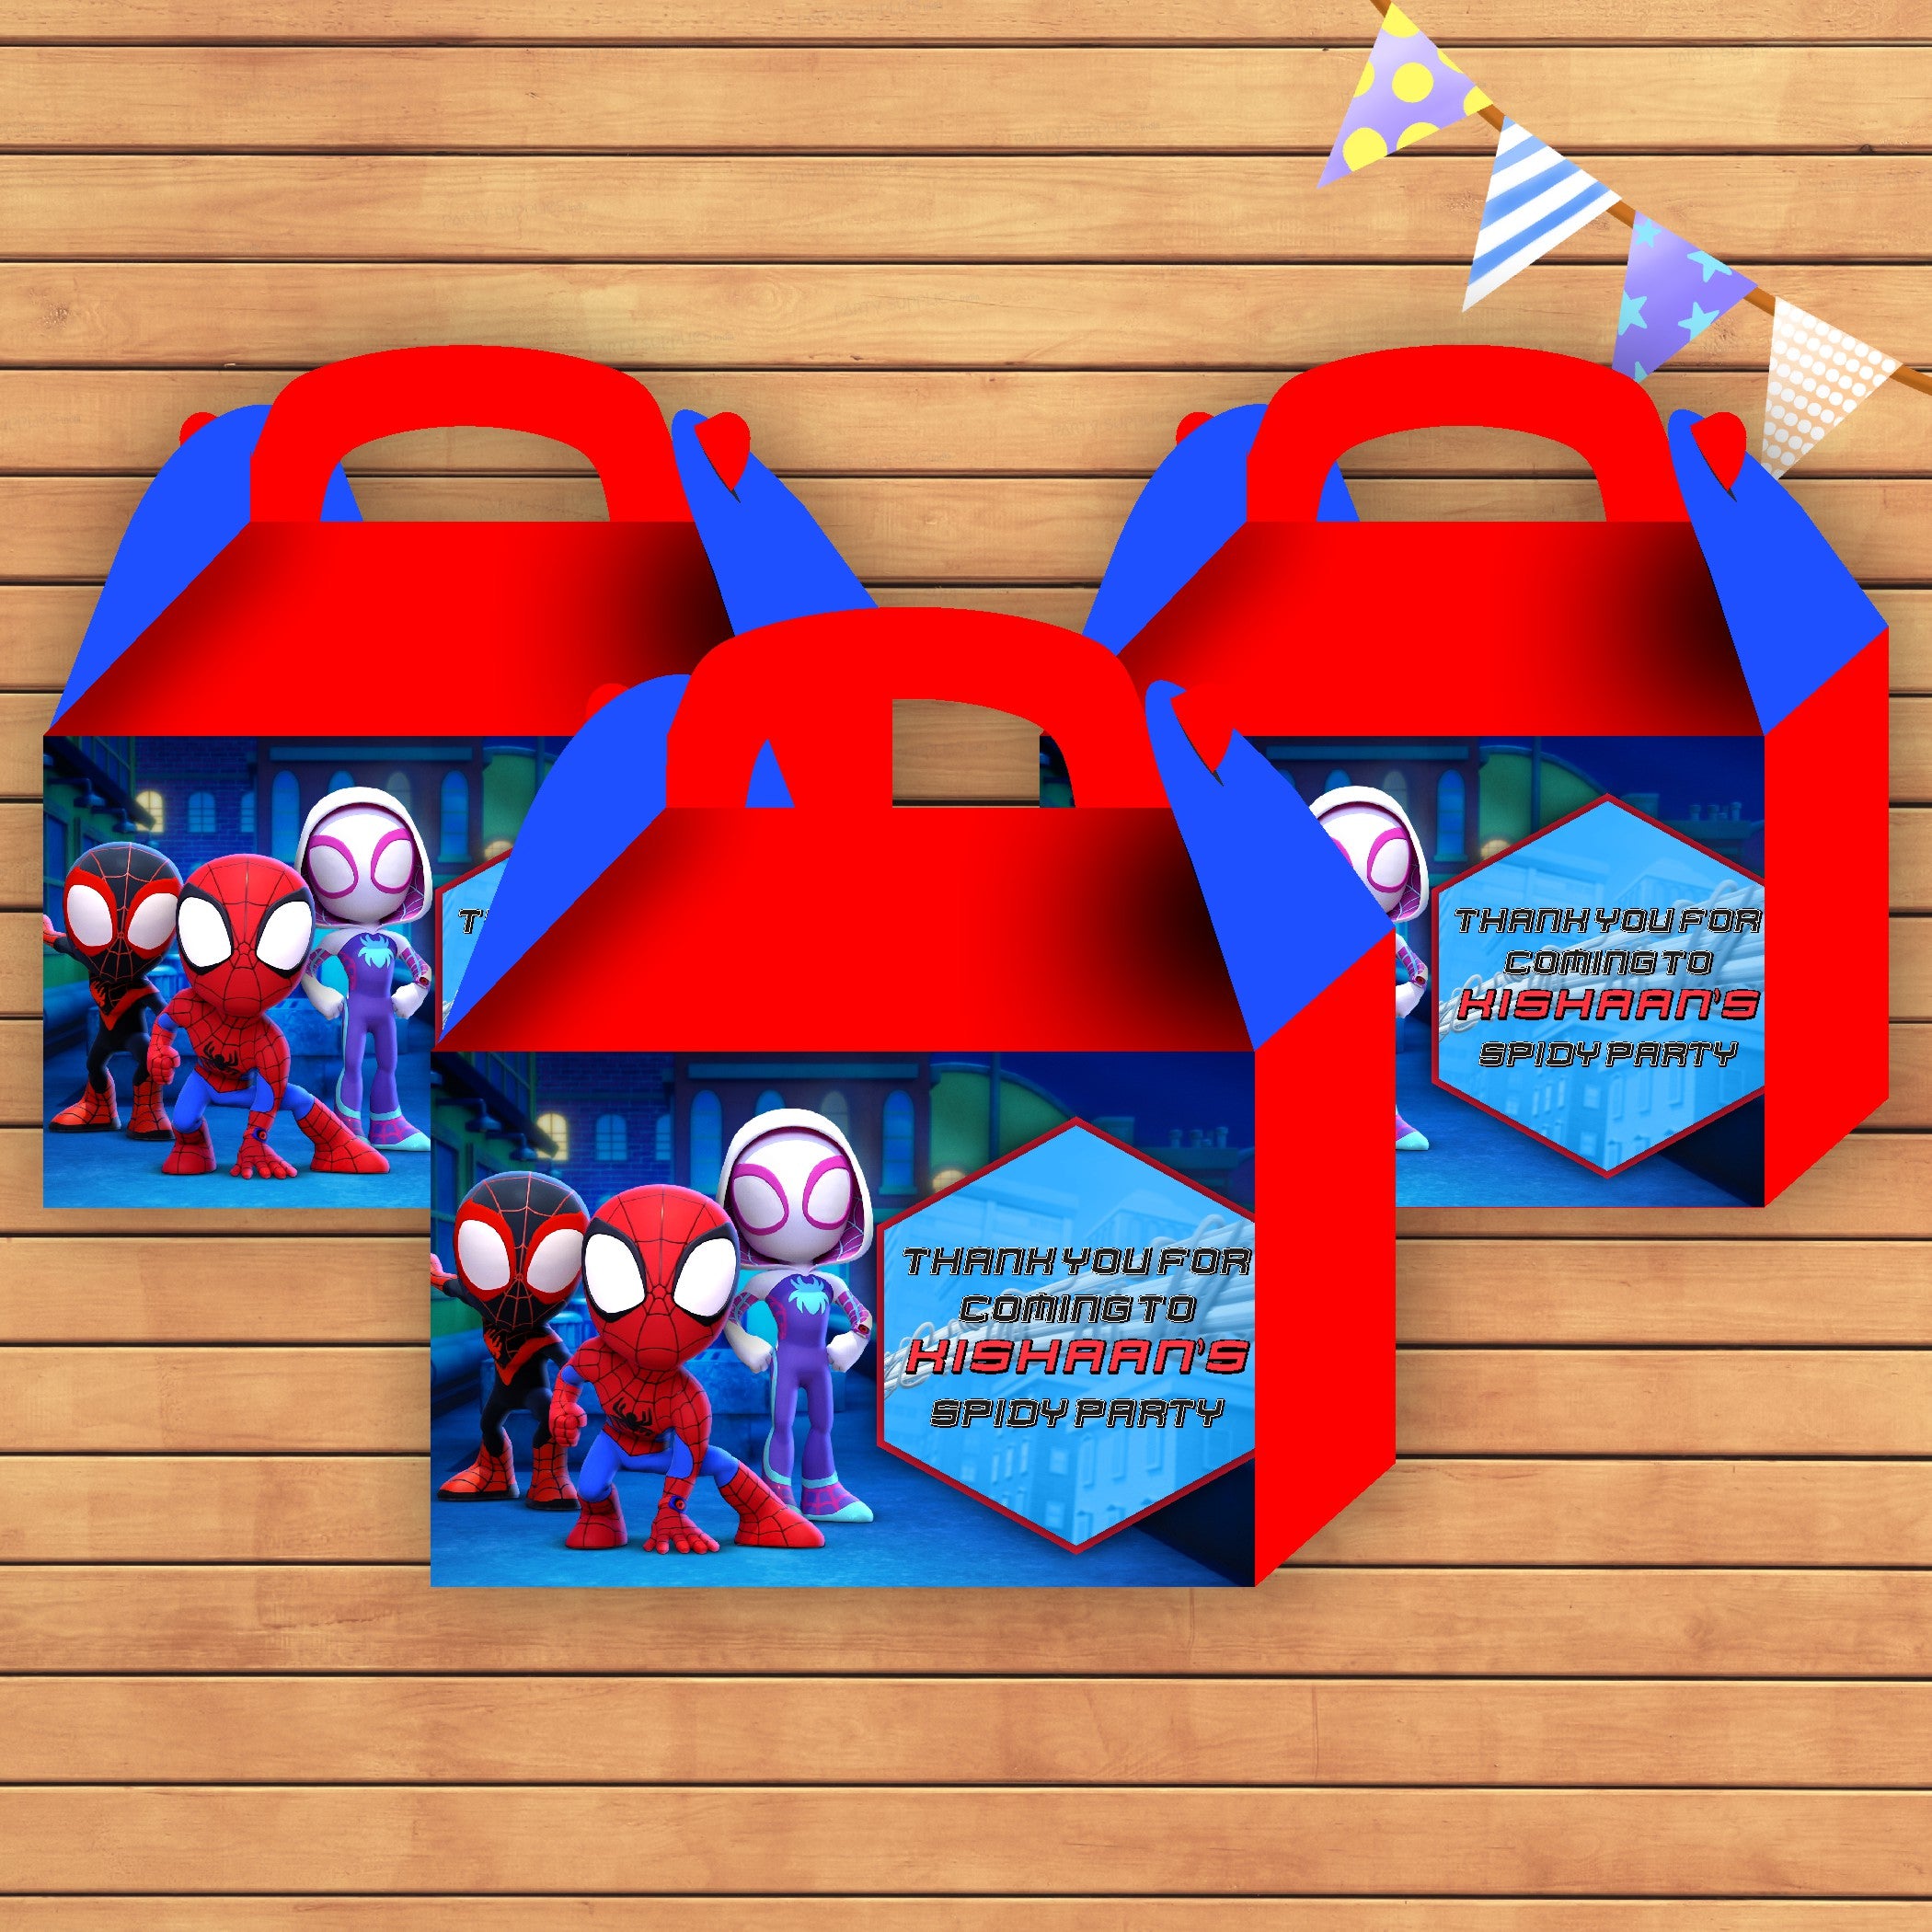 PSI Spidey and his Amazing Friends Theme Goodie Return Gift Boxes